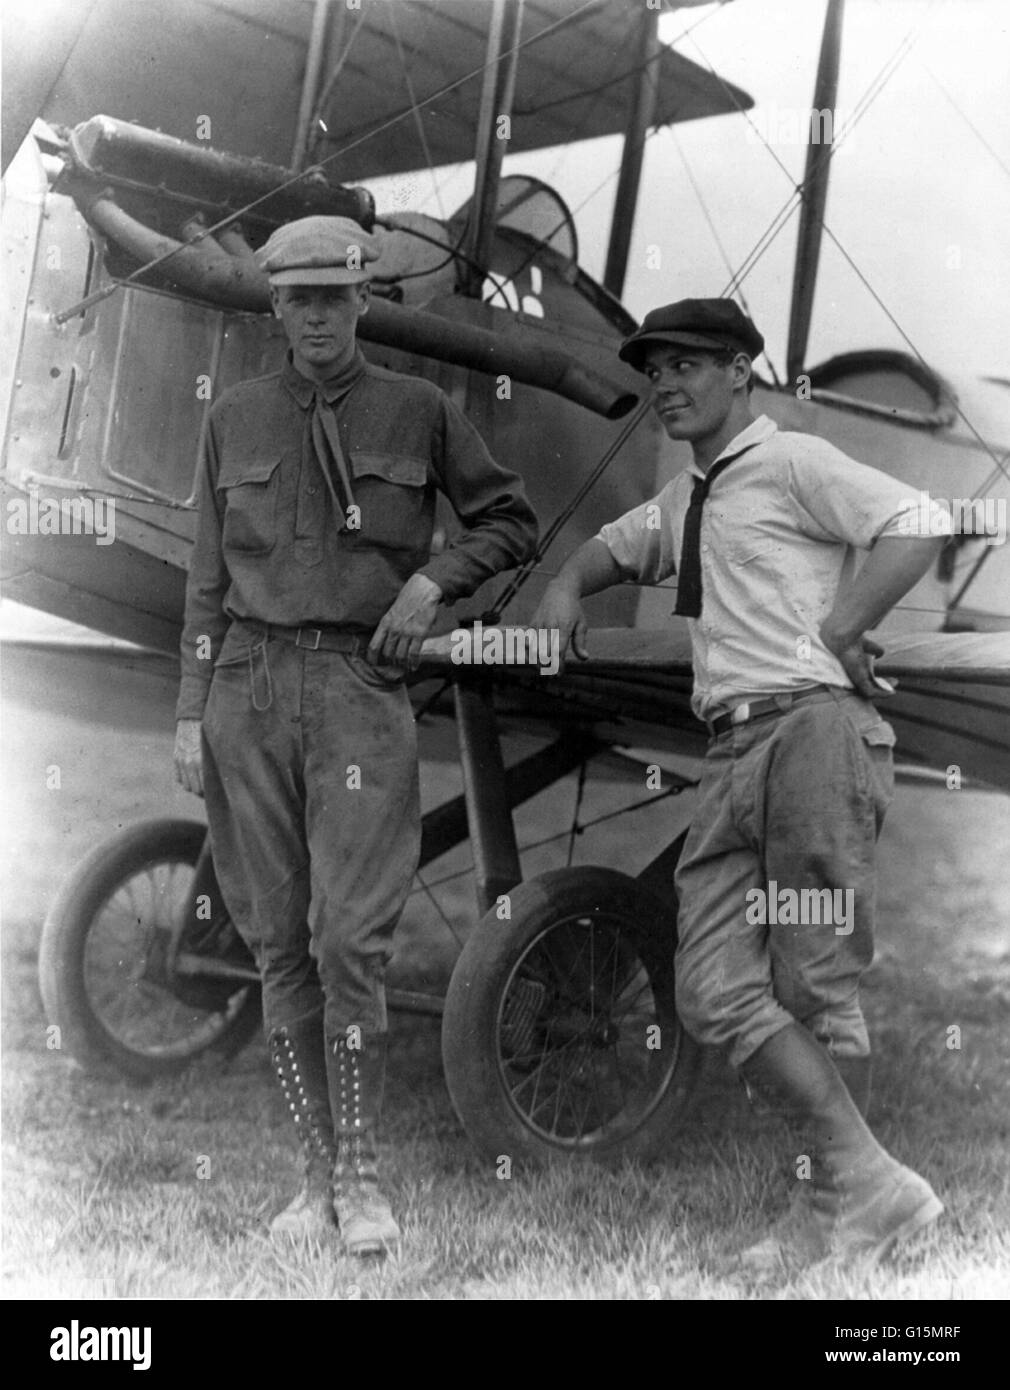 Lindbergh and Harlan 'Bud' Gurney standing by plane at Lambert Field, St. Louis, Missouri. Circa 1923-28. Charles Augustus Lindbergh (February 4, 1902 - August 26, 1974) was an American aviator. Lindbergh gained world fame as the result of his solo non-st Stock Photo